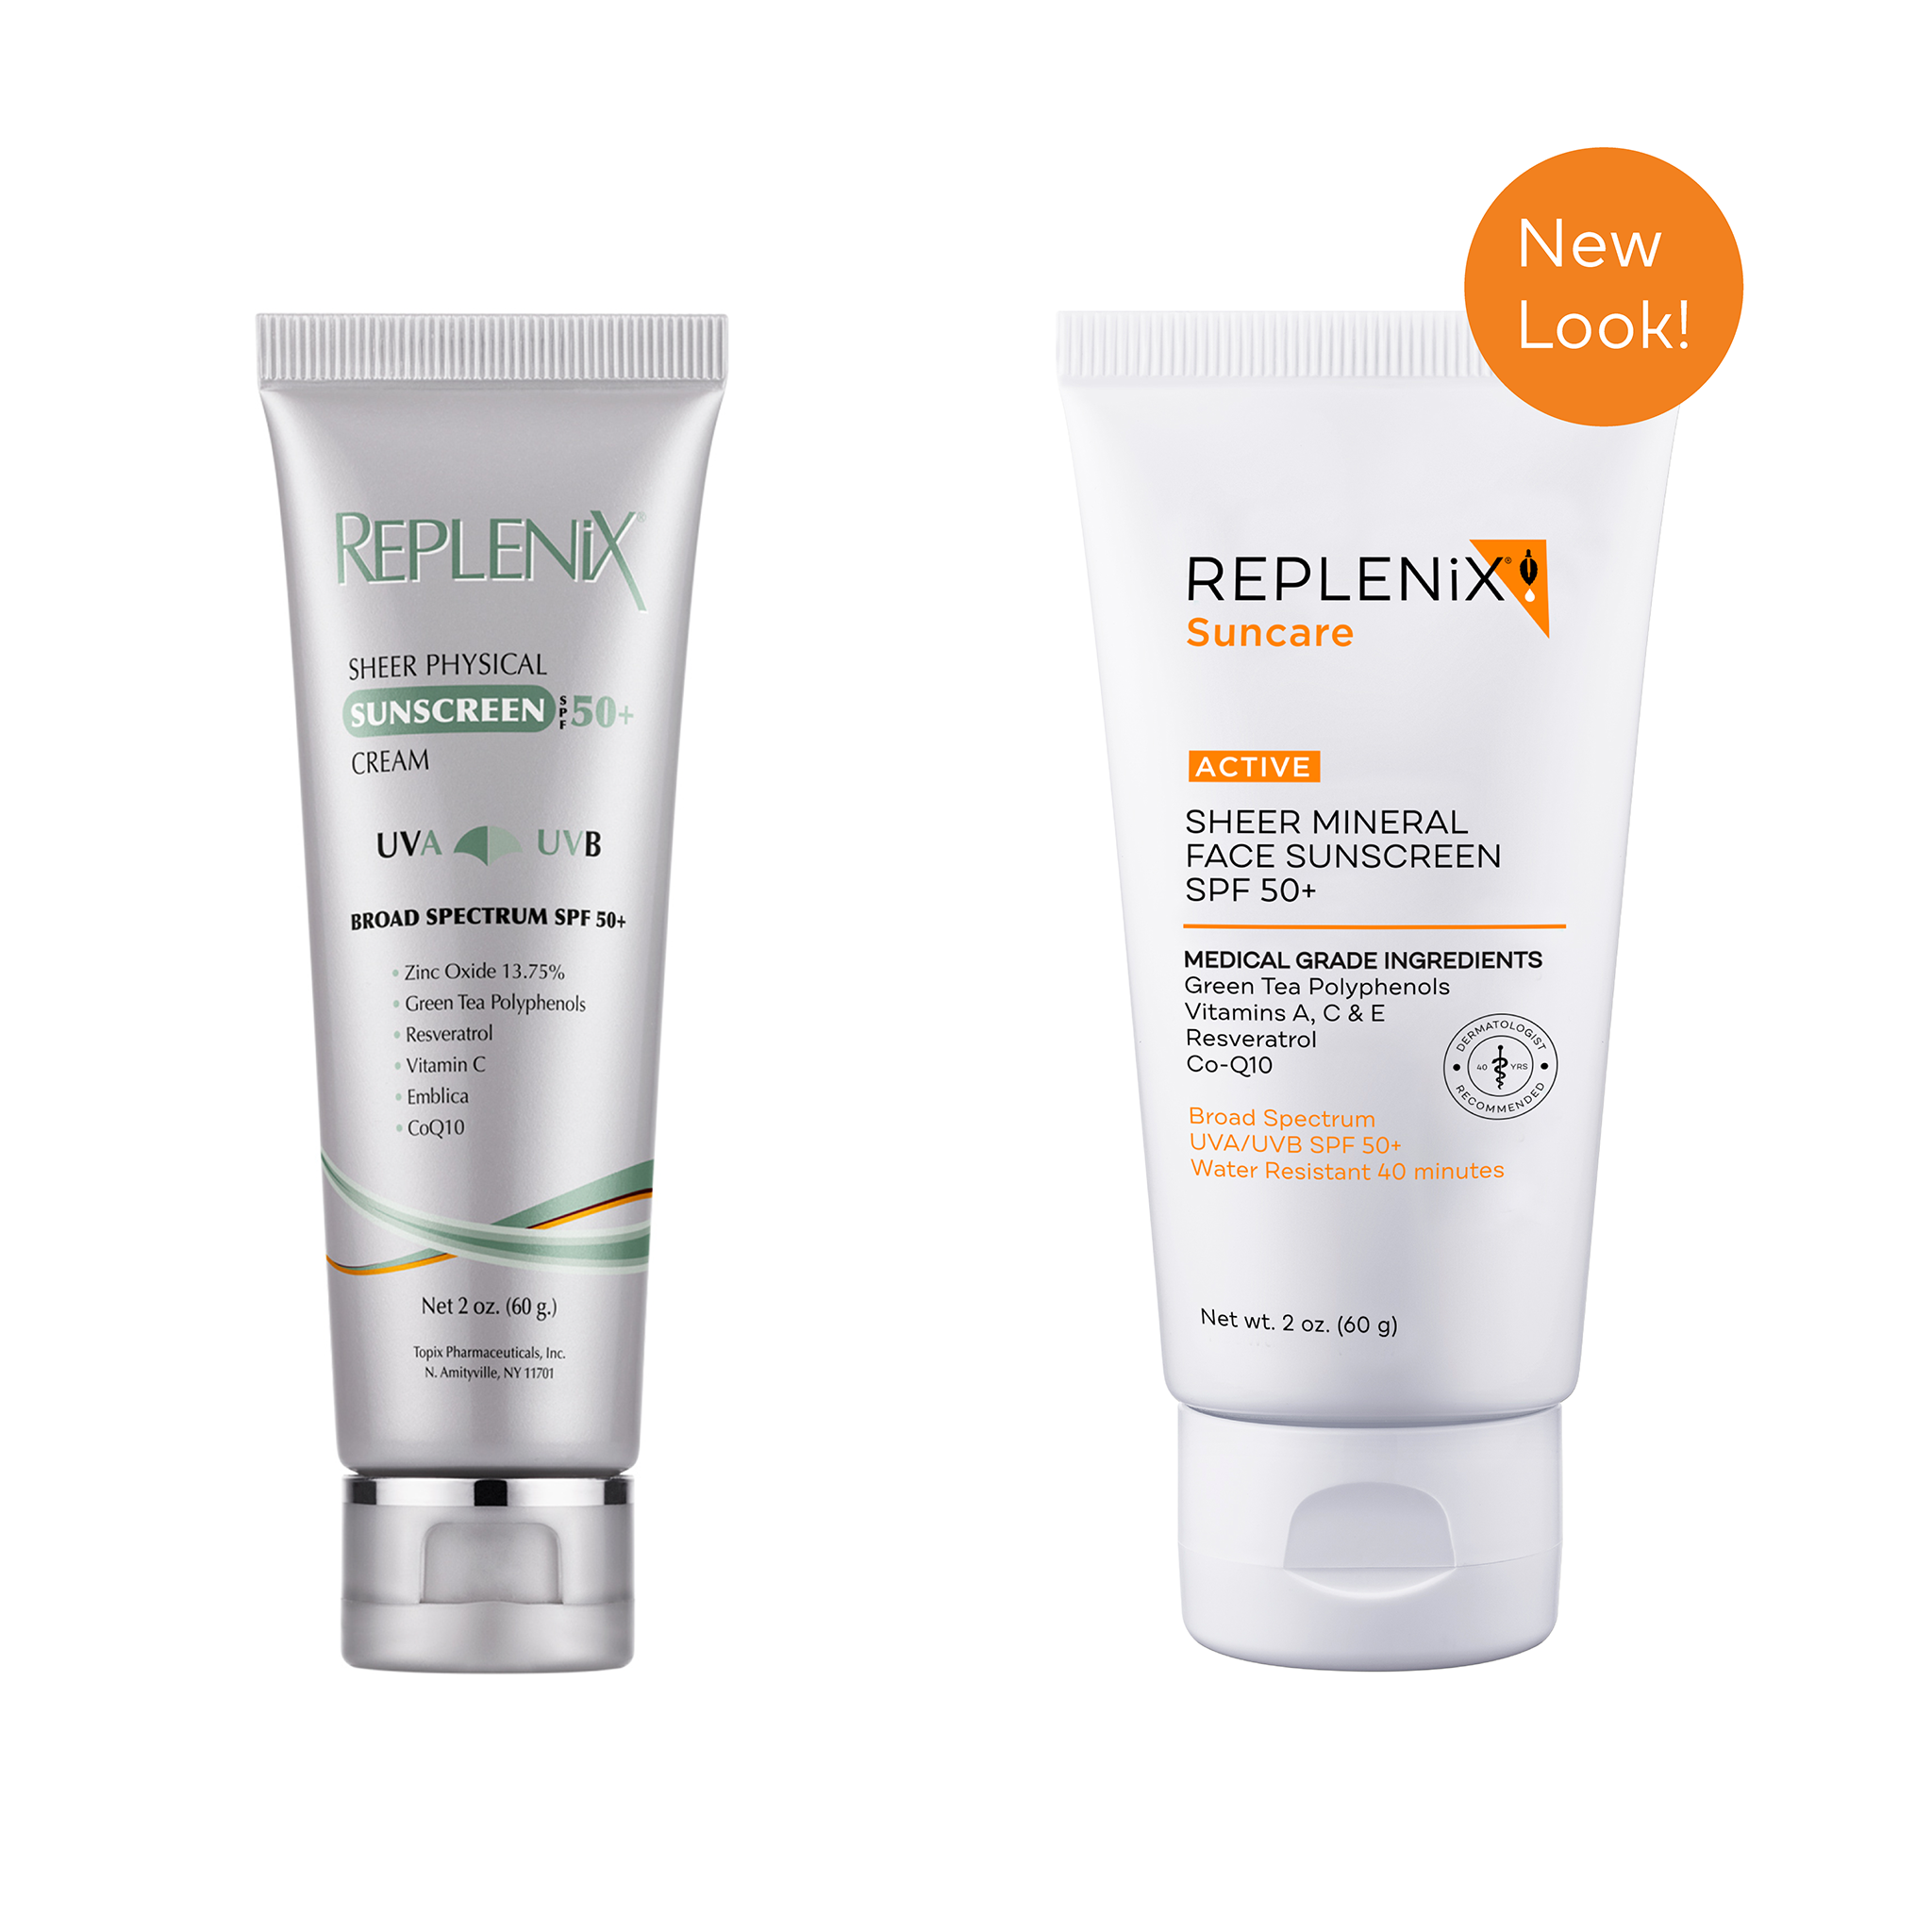 Formerly known as REPLENIX Sheer Physical Sunscreen SPF 50+ Cream